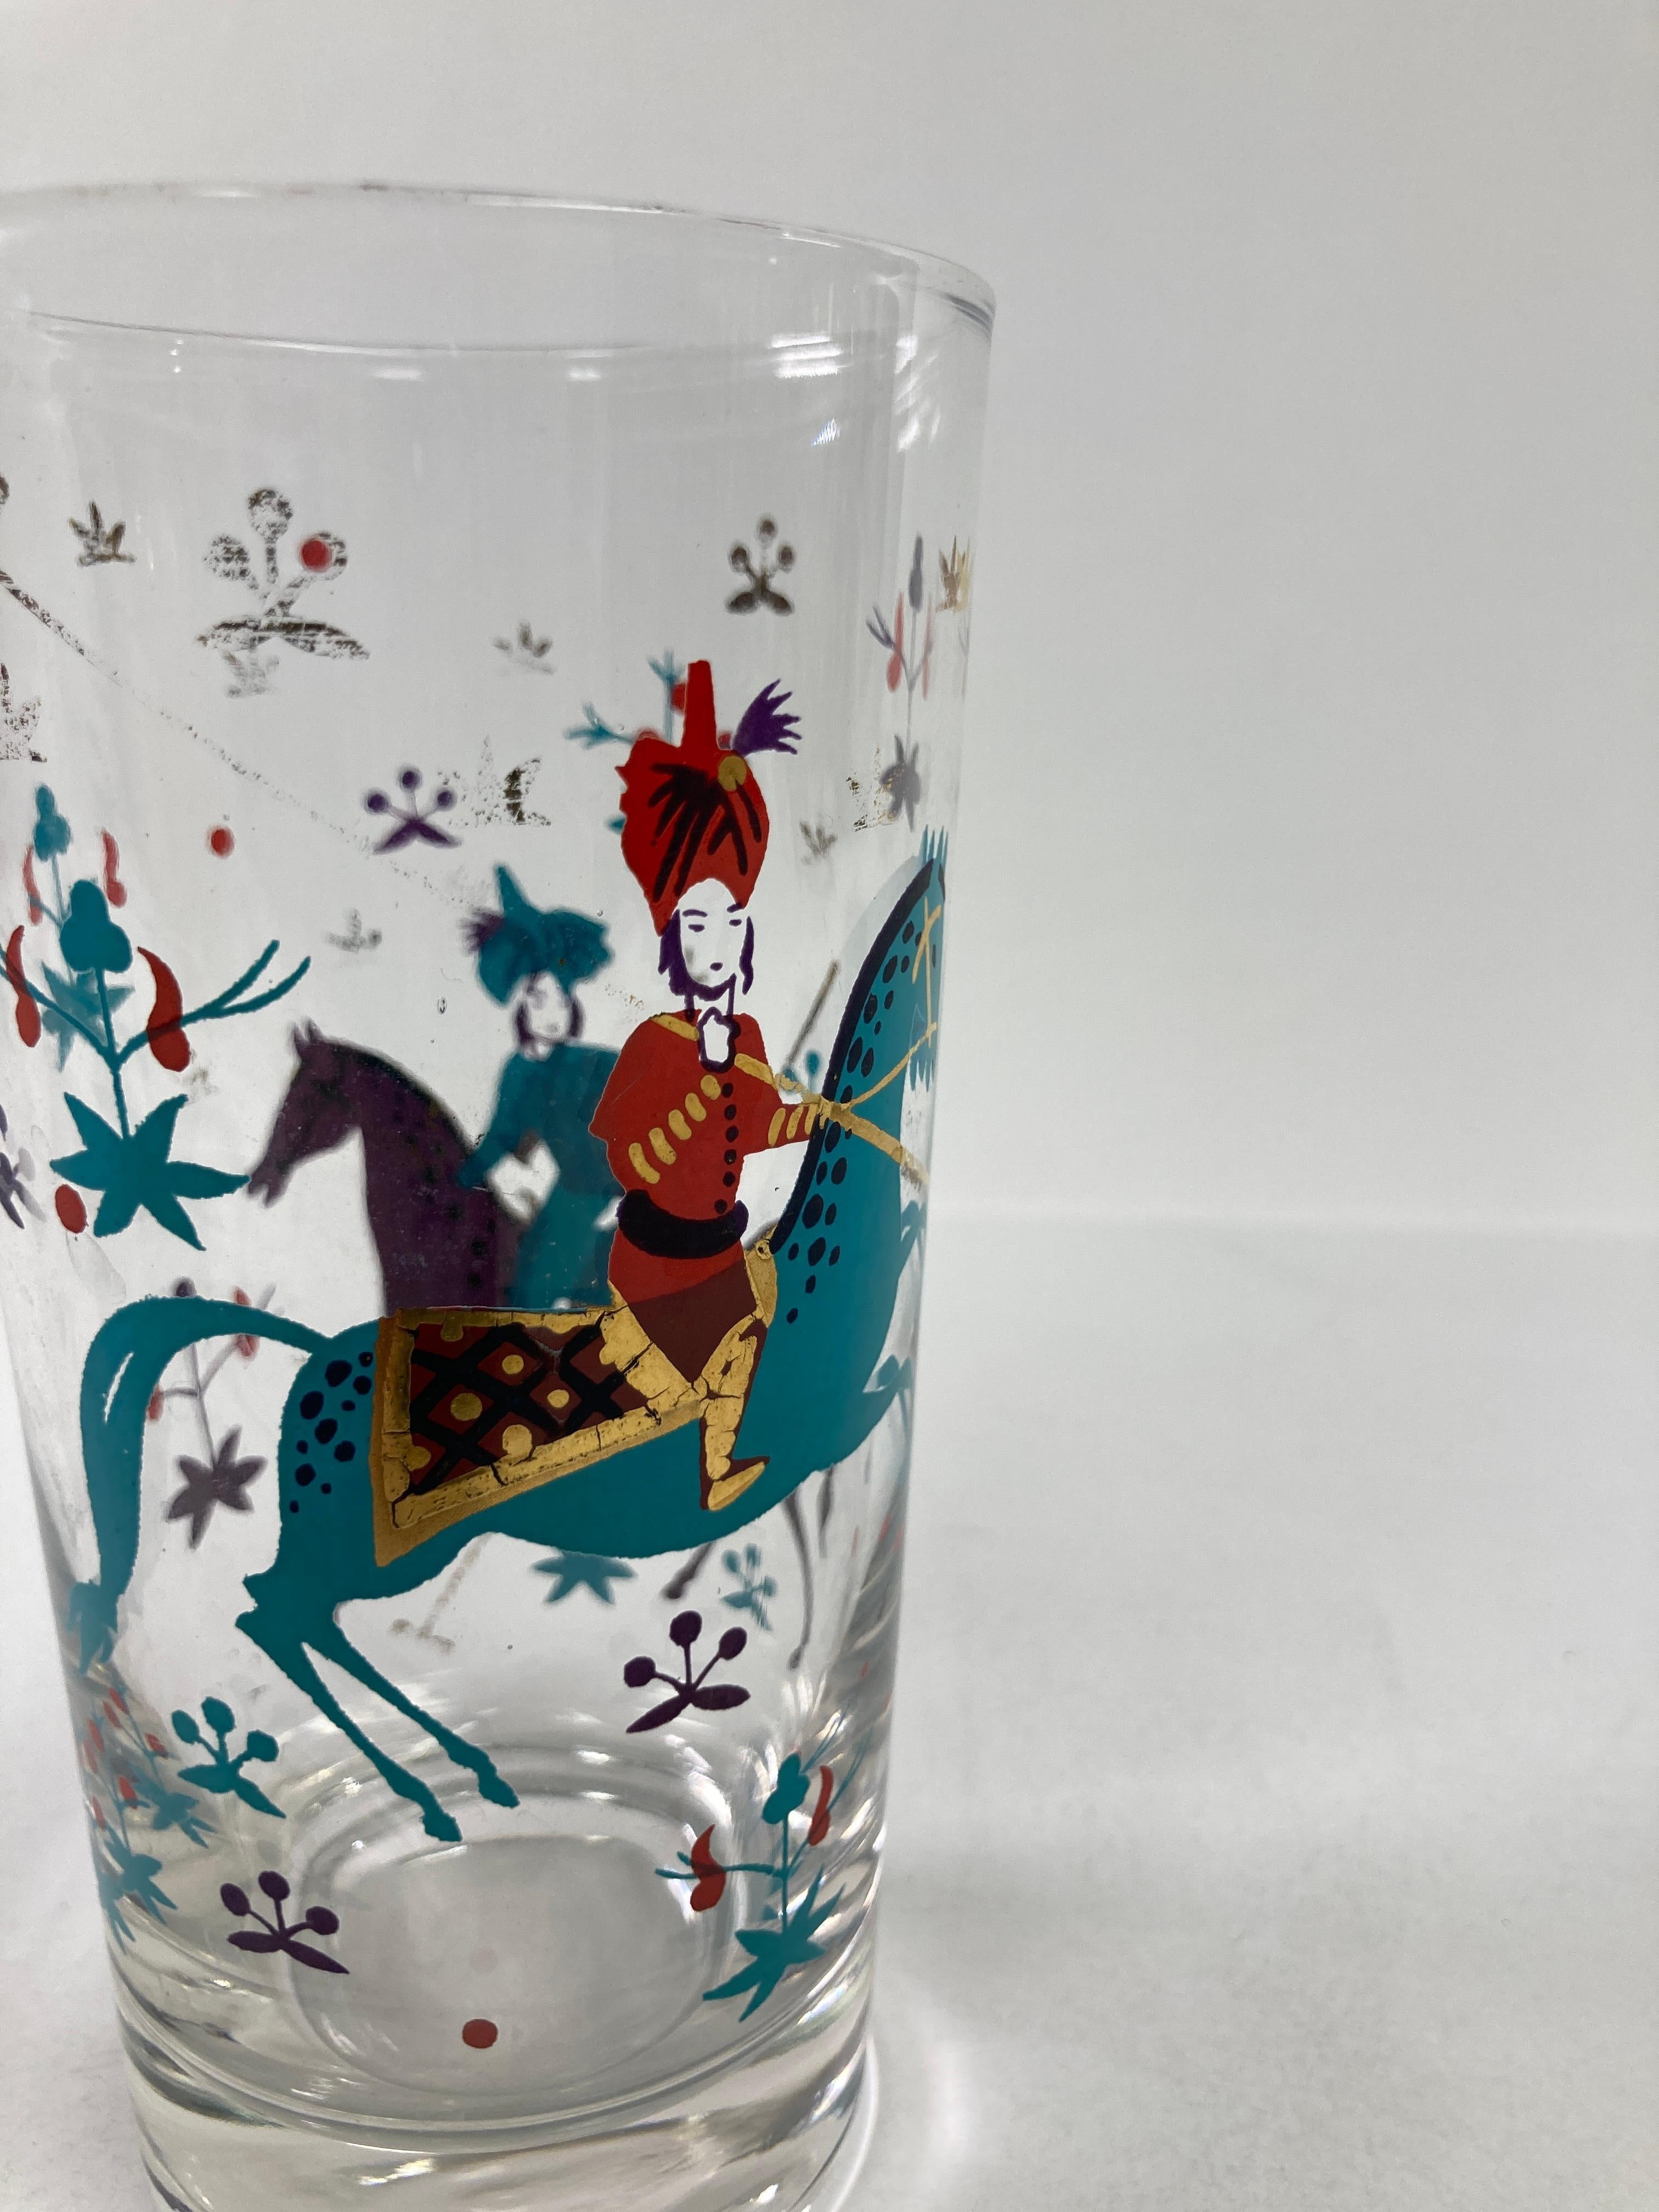 20th Century Arabian Nights Highball Tumbler Turquoise and Gold by Georges Briard 1950's For Sale